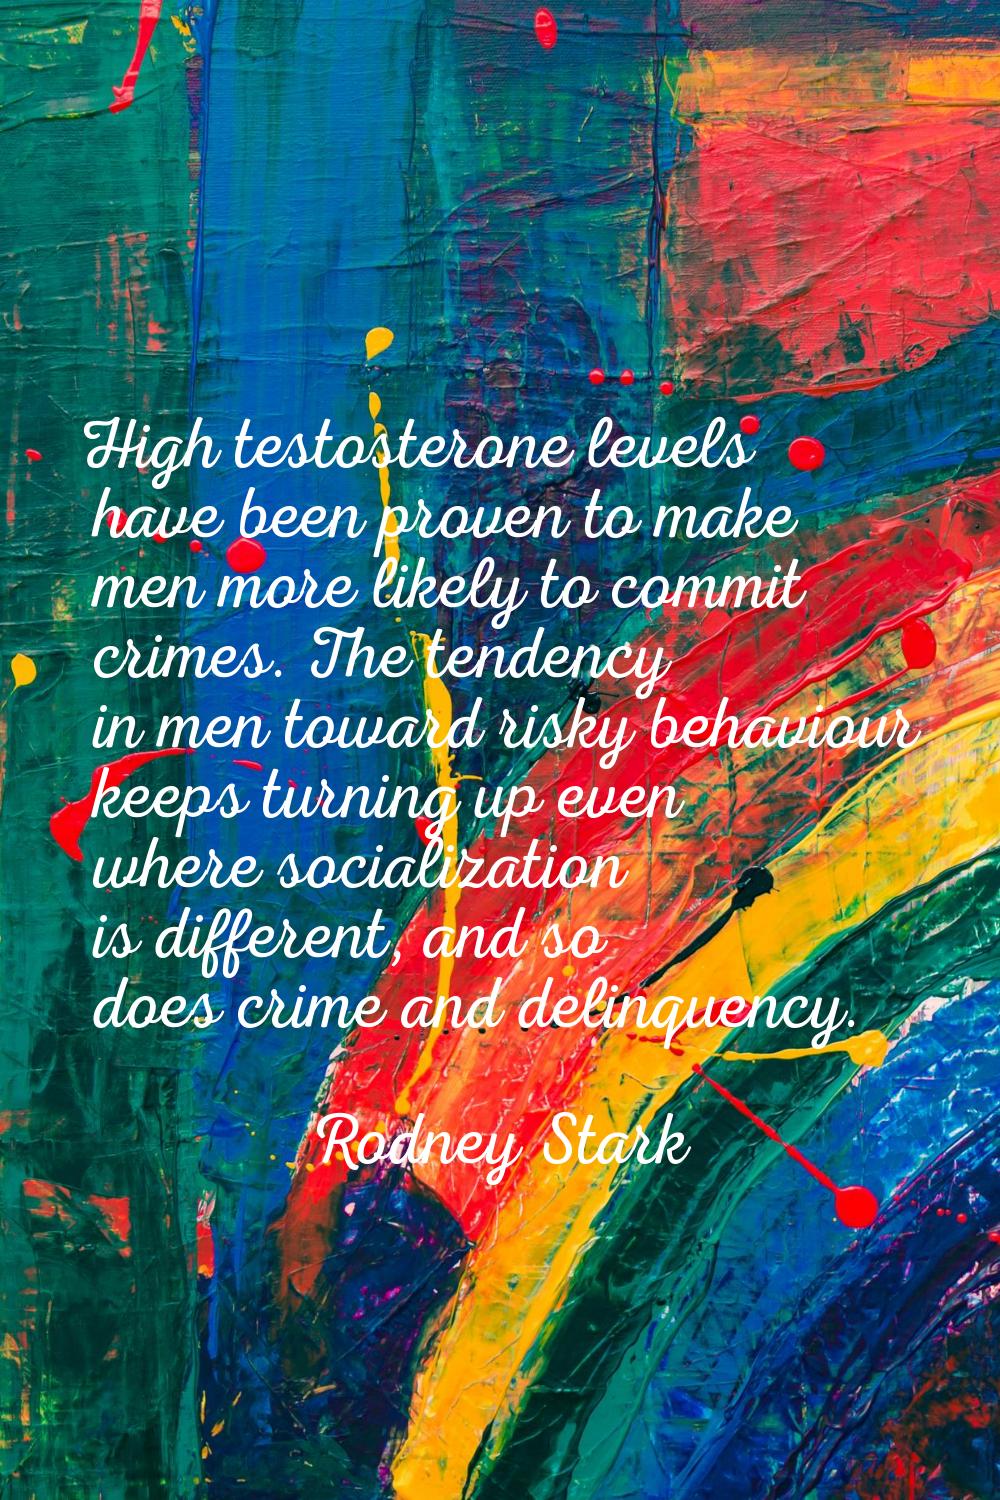 High testosterone levels have been proven to make men more likely to commit crimes. The tendency in